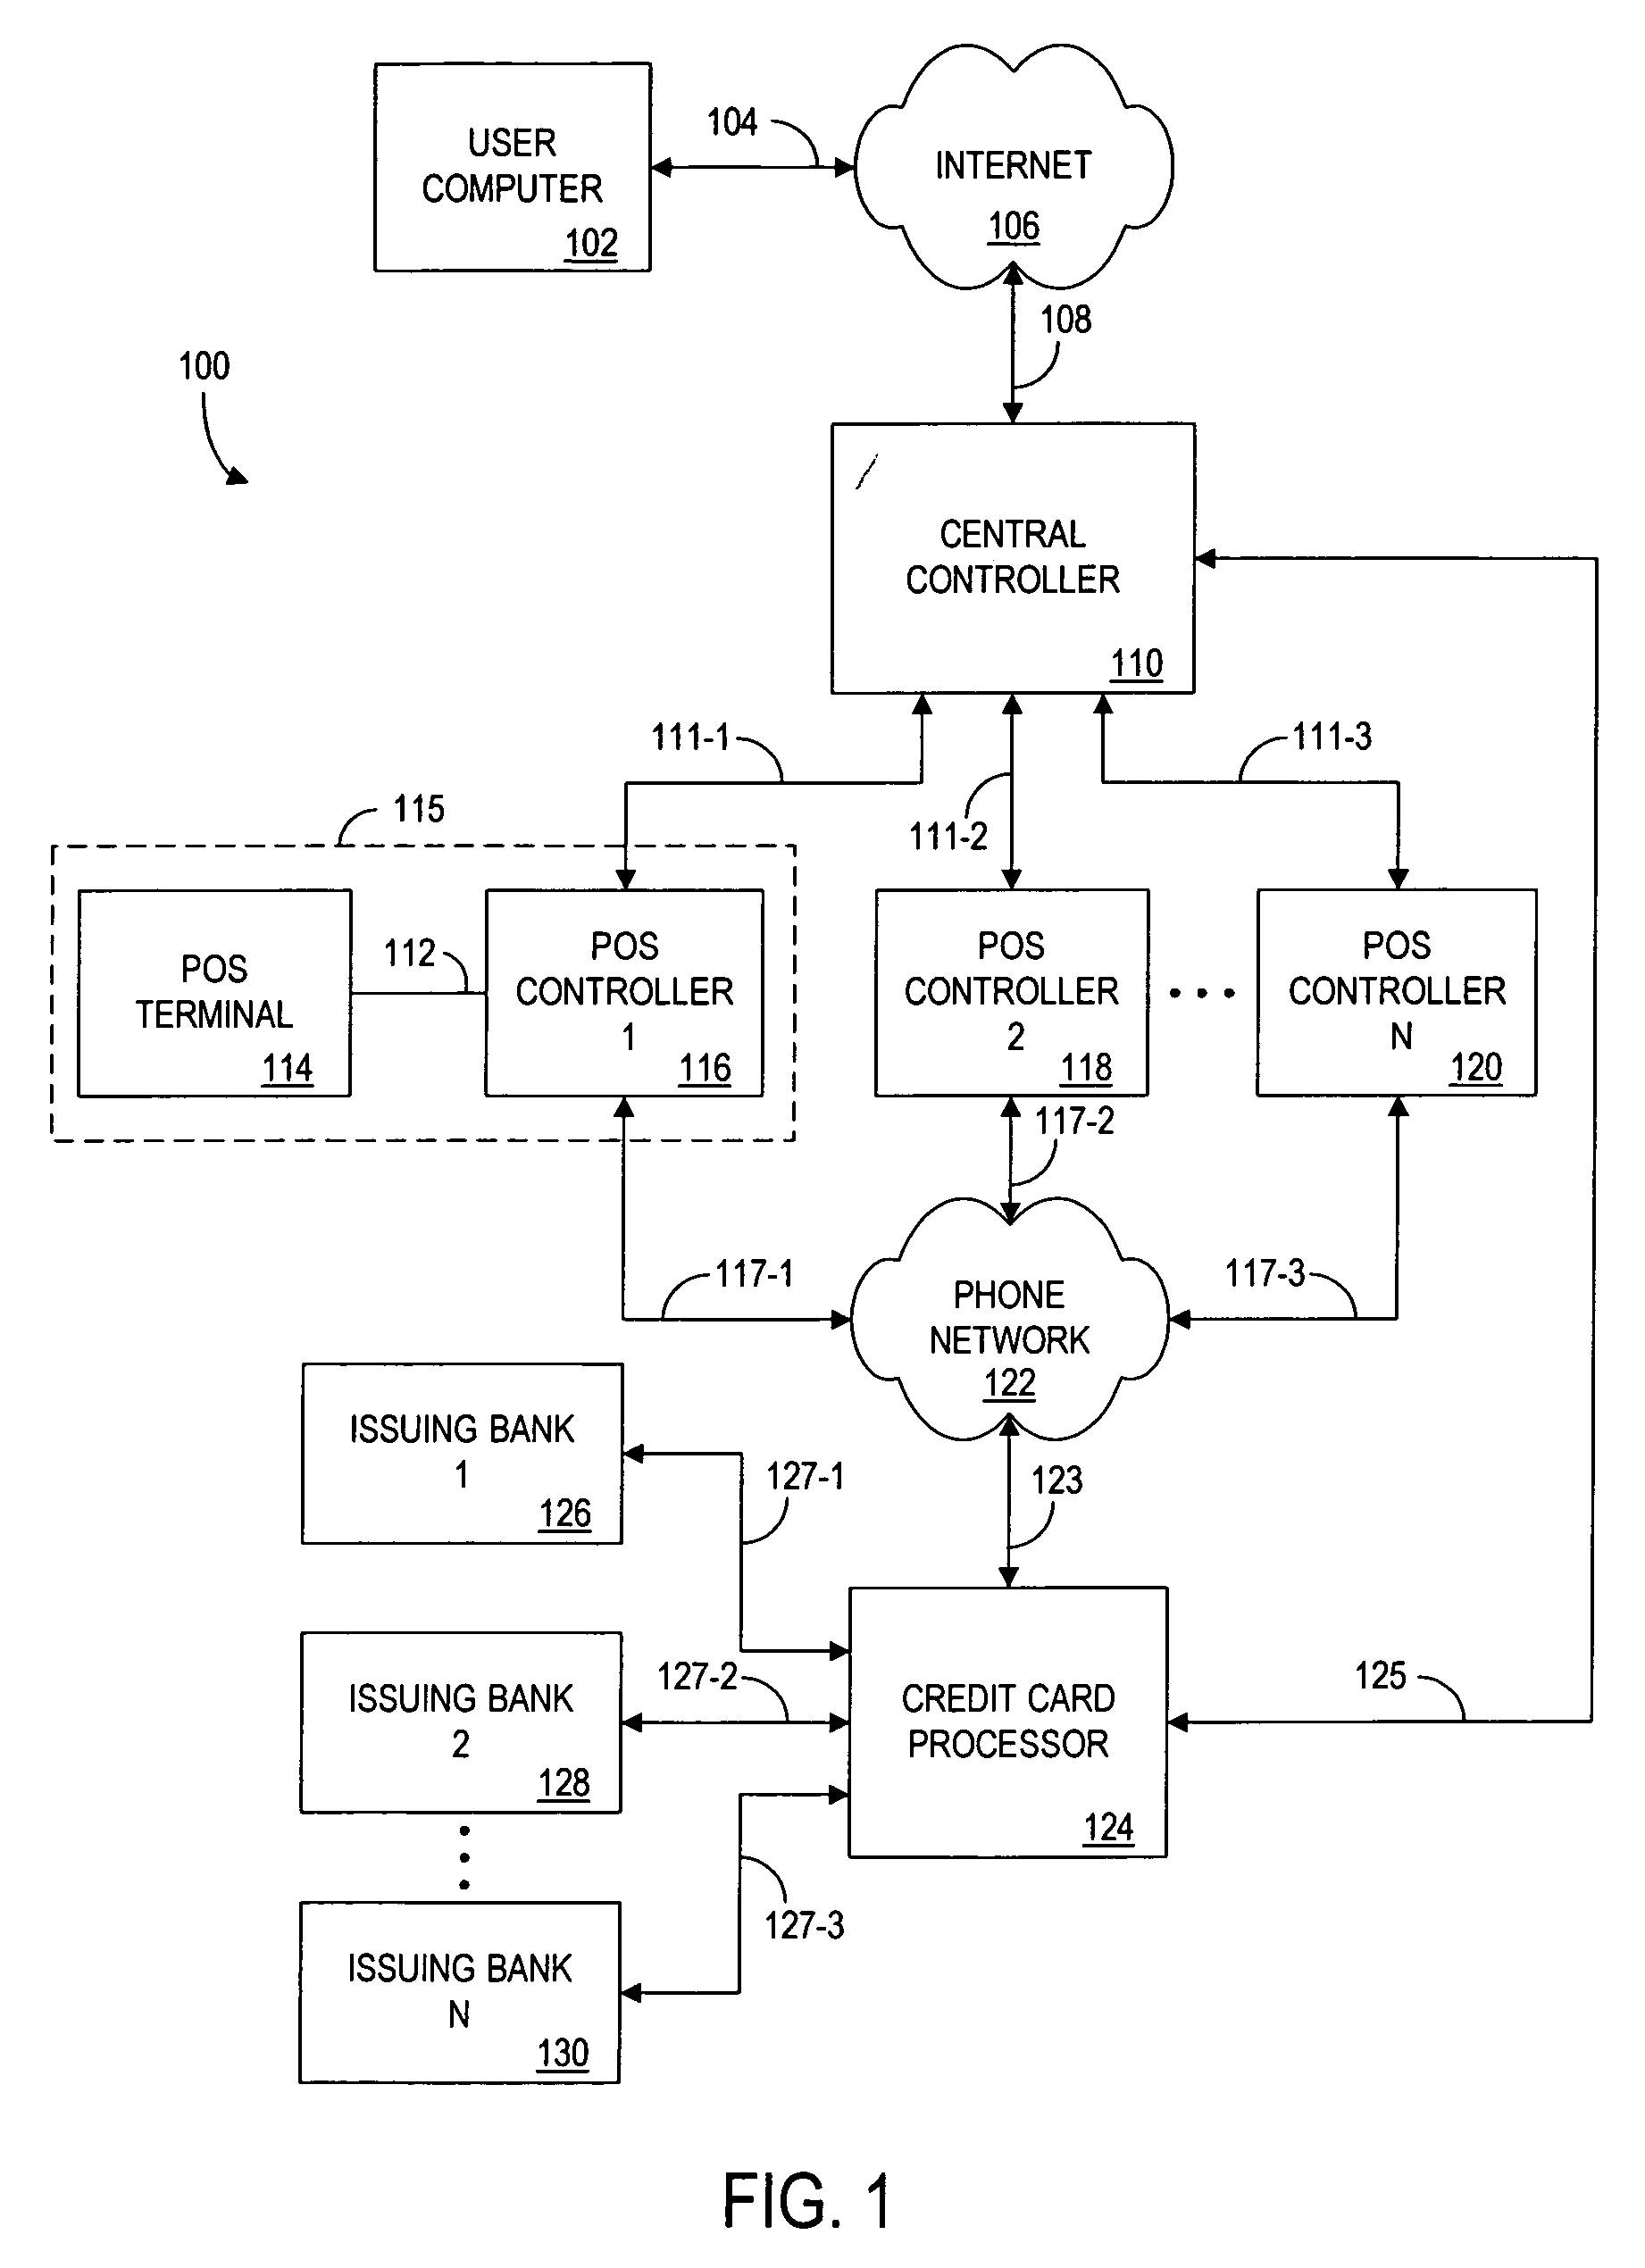 System and process for local acquisition of products priced online